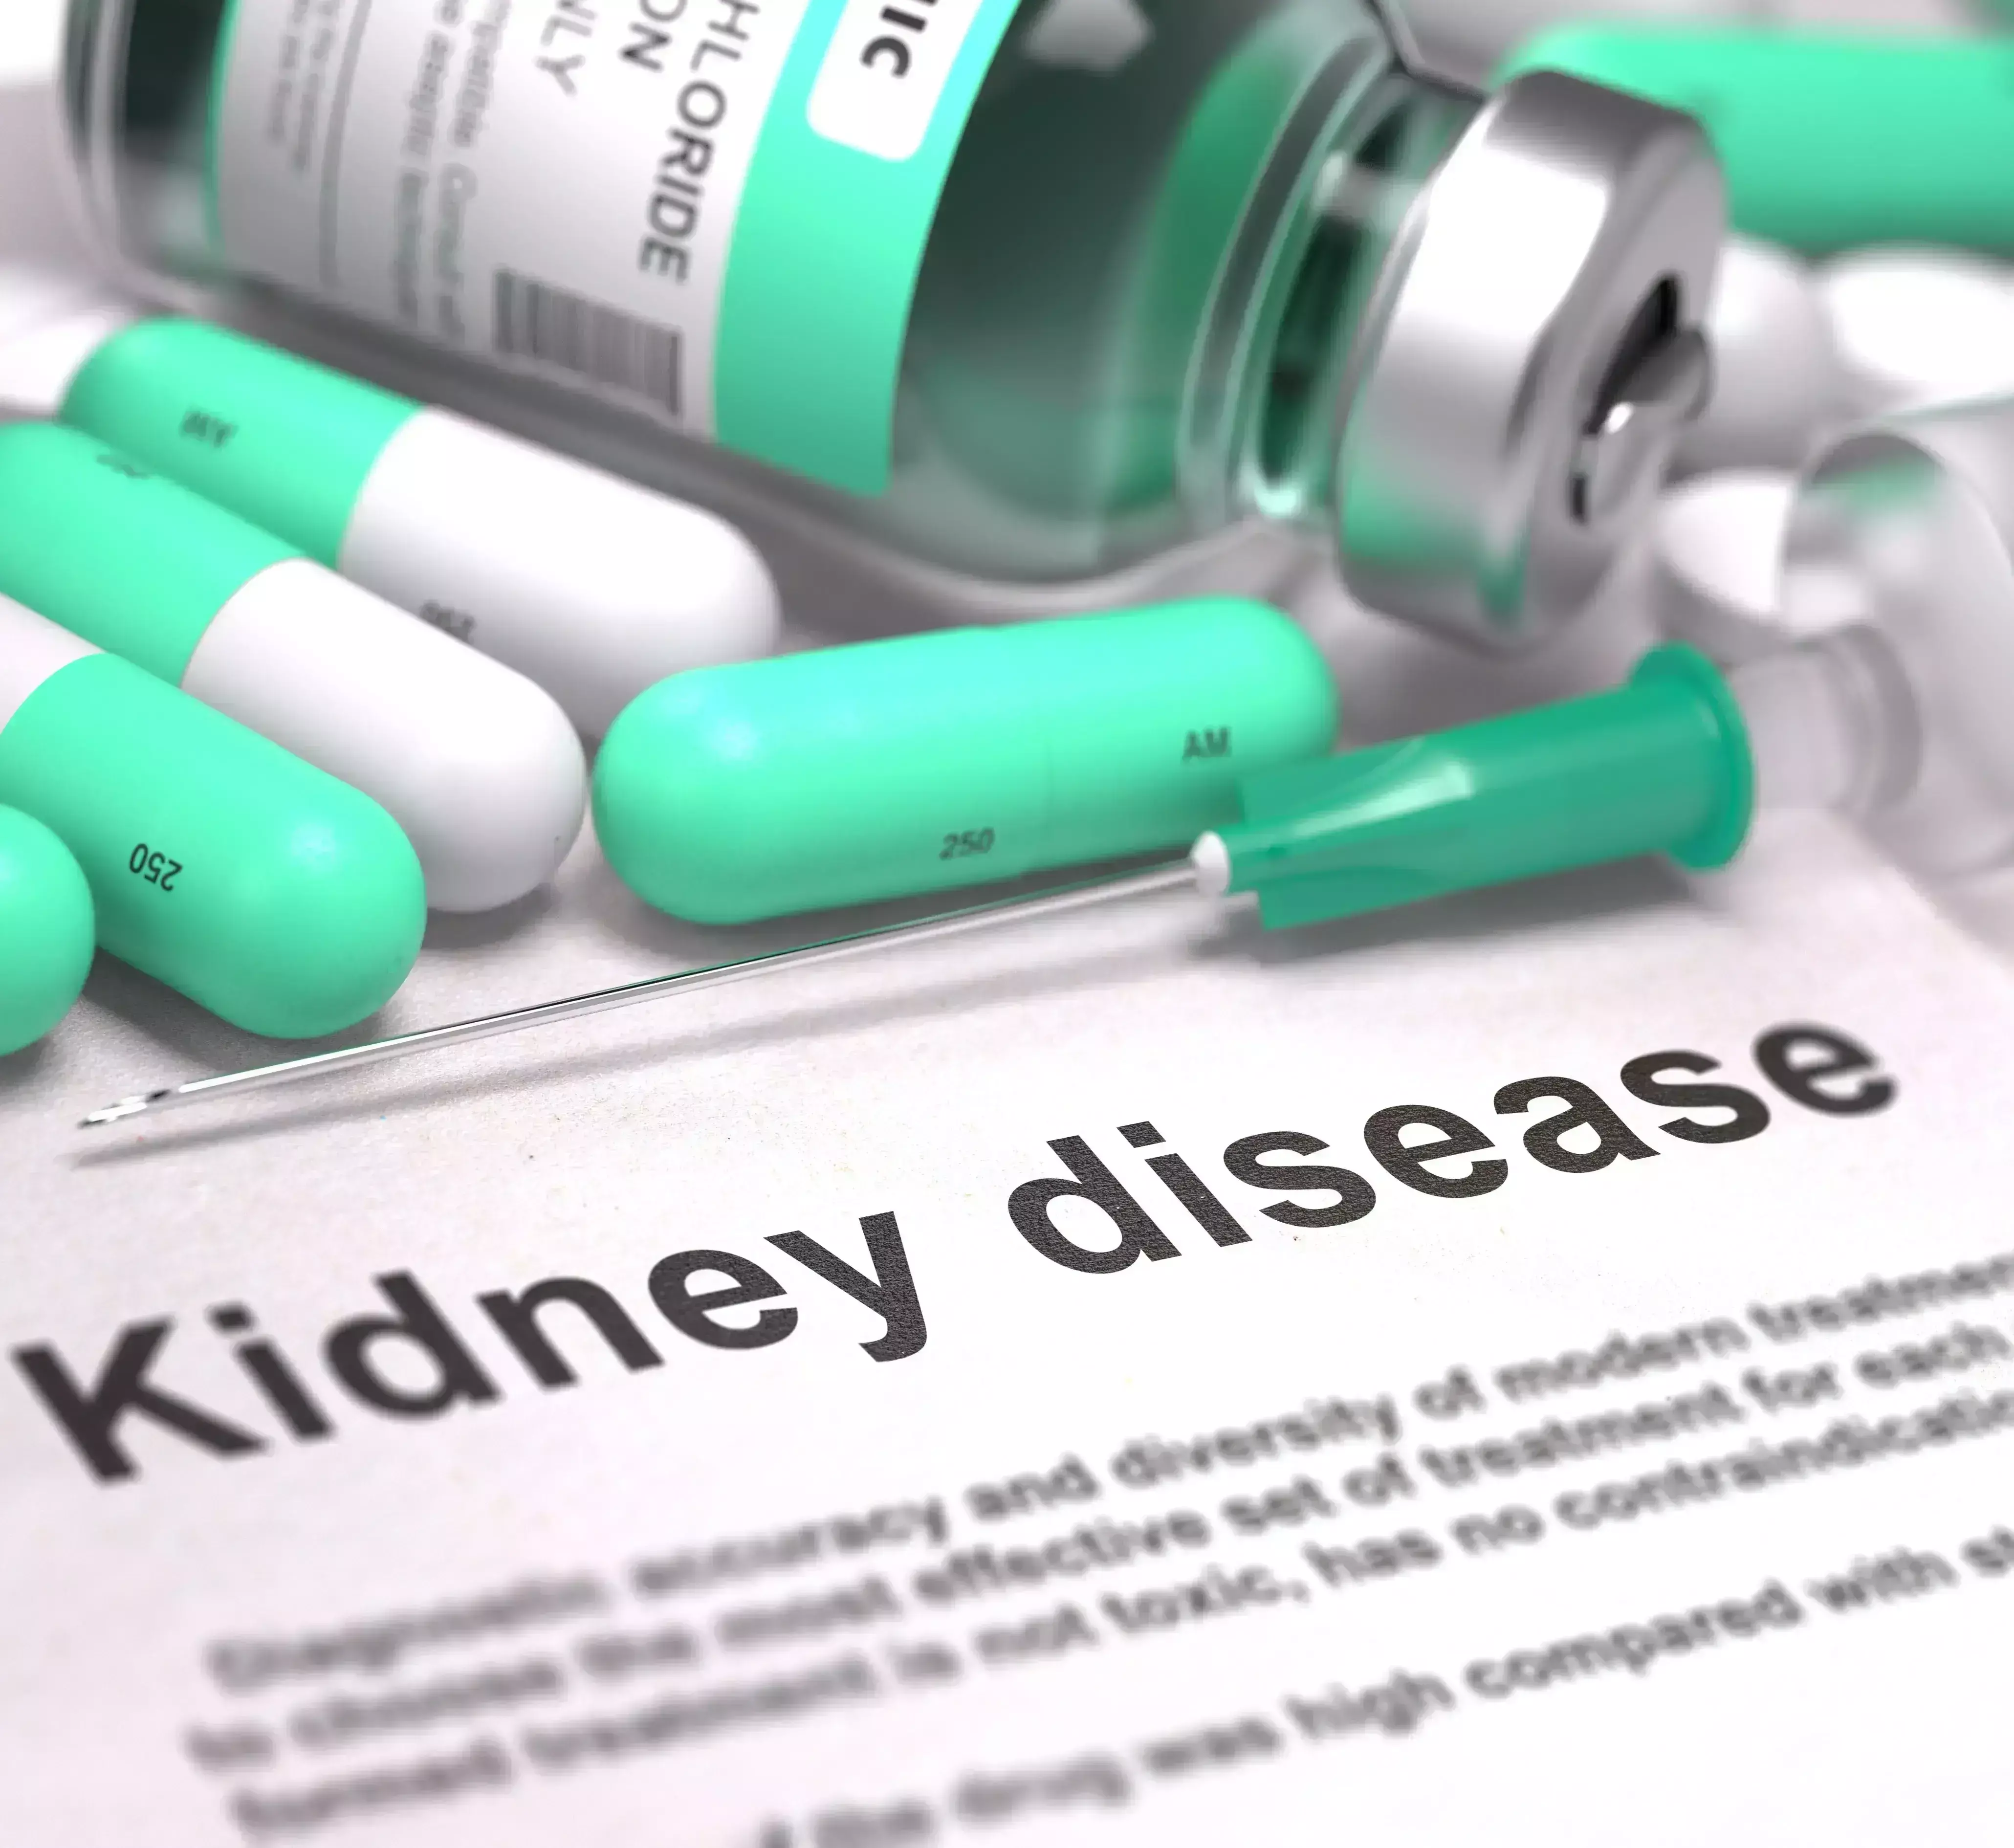 HCQS and leflunomide may improve renal  function and proteinuria in IGA nephropathy